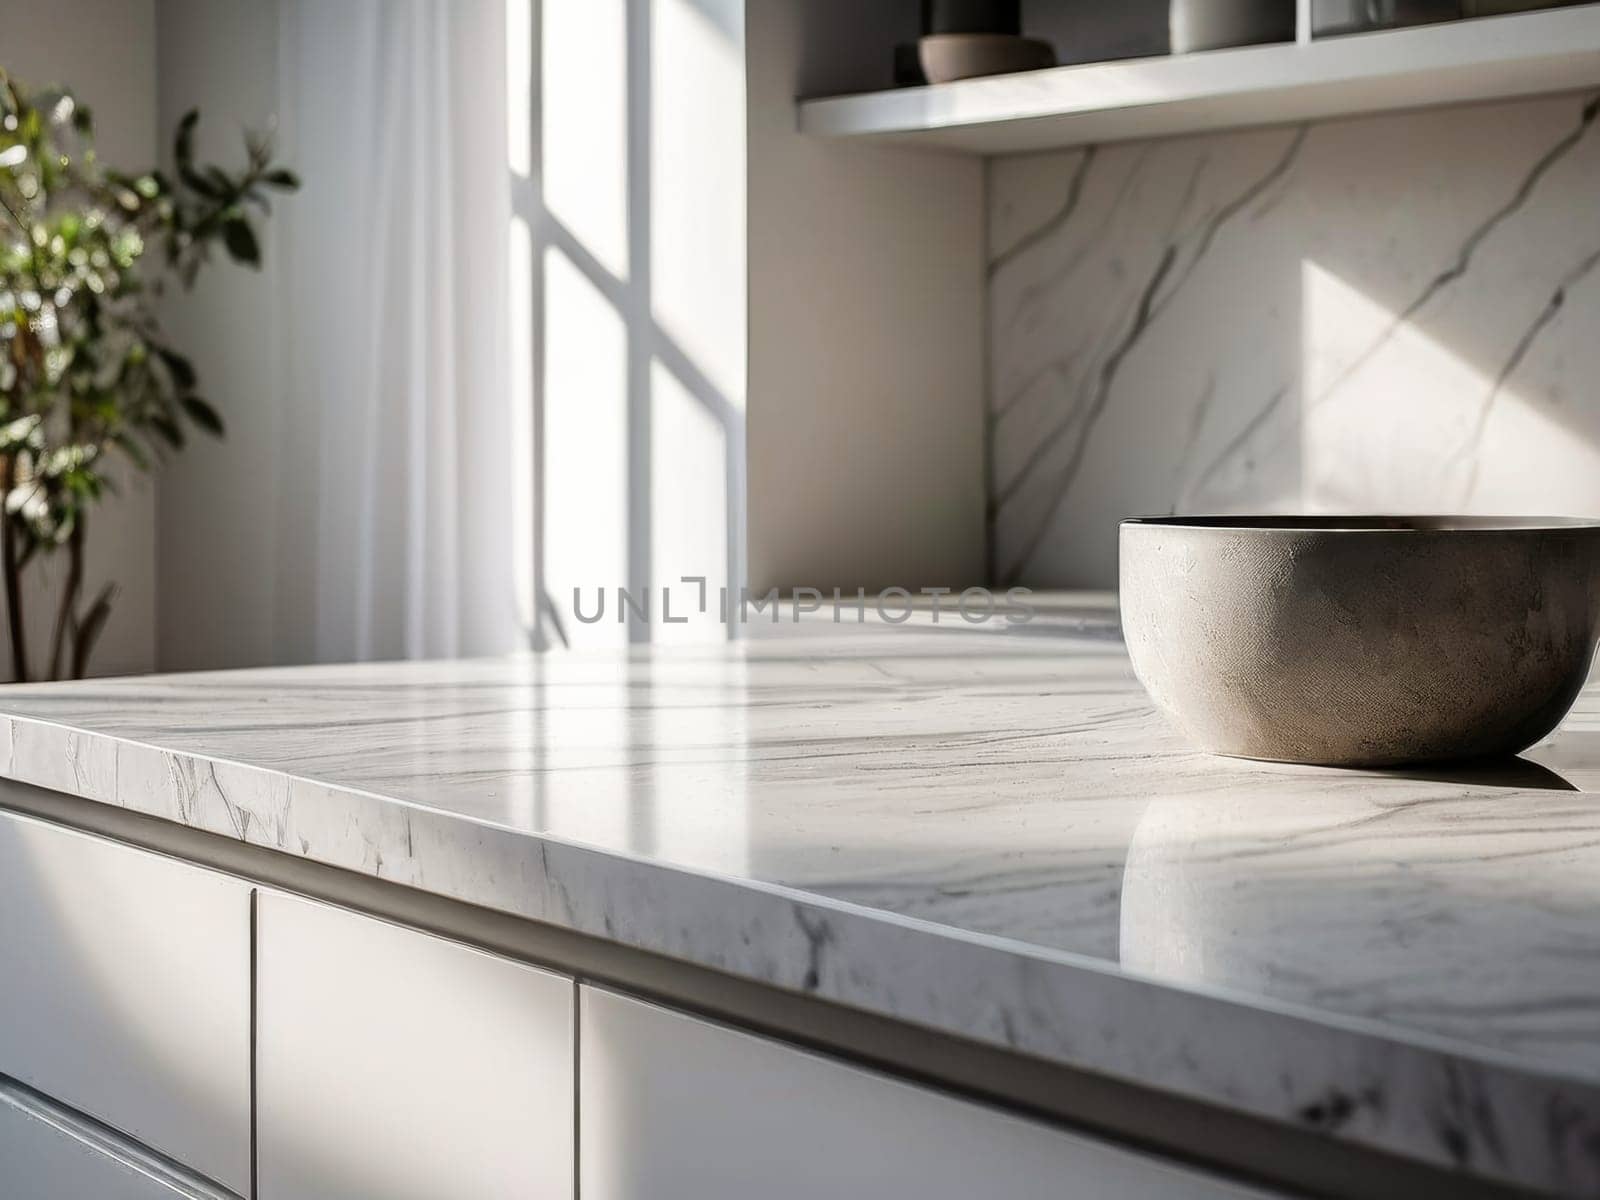 Flowers on marble table of modern kitchen interior. Cozy fashionable kitchen decor. White aesthetic kitchen interior details and decor. Empty table with copy space.